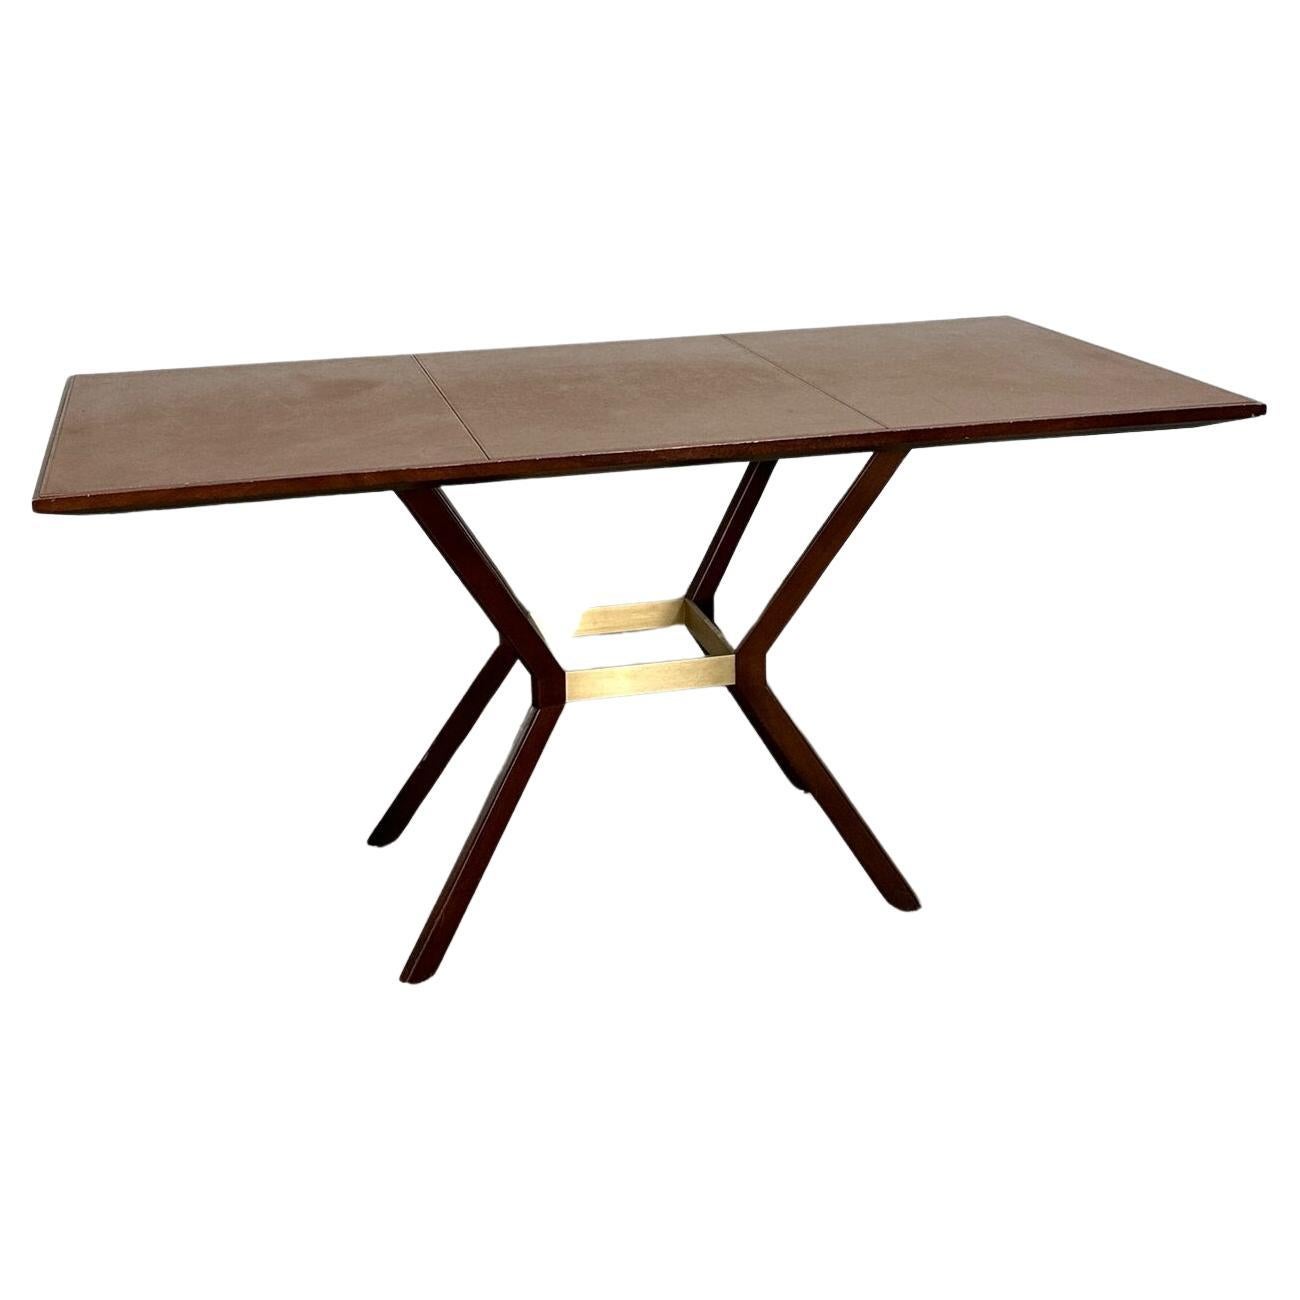 Display Table with Leather Surface For Sale